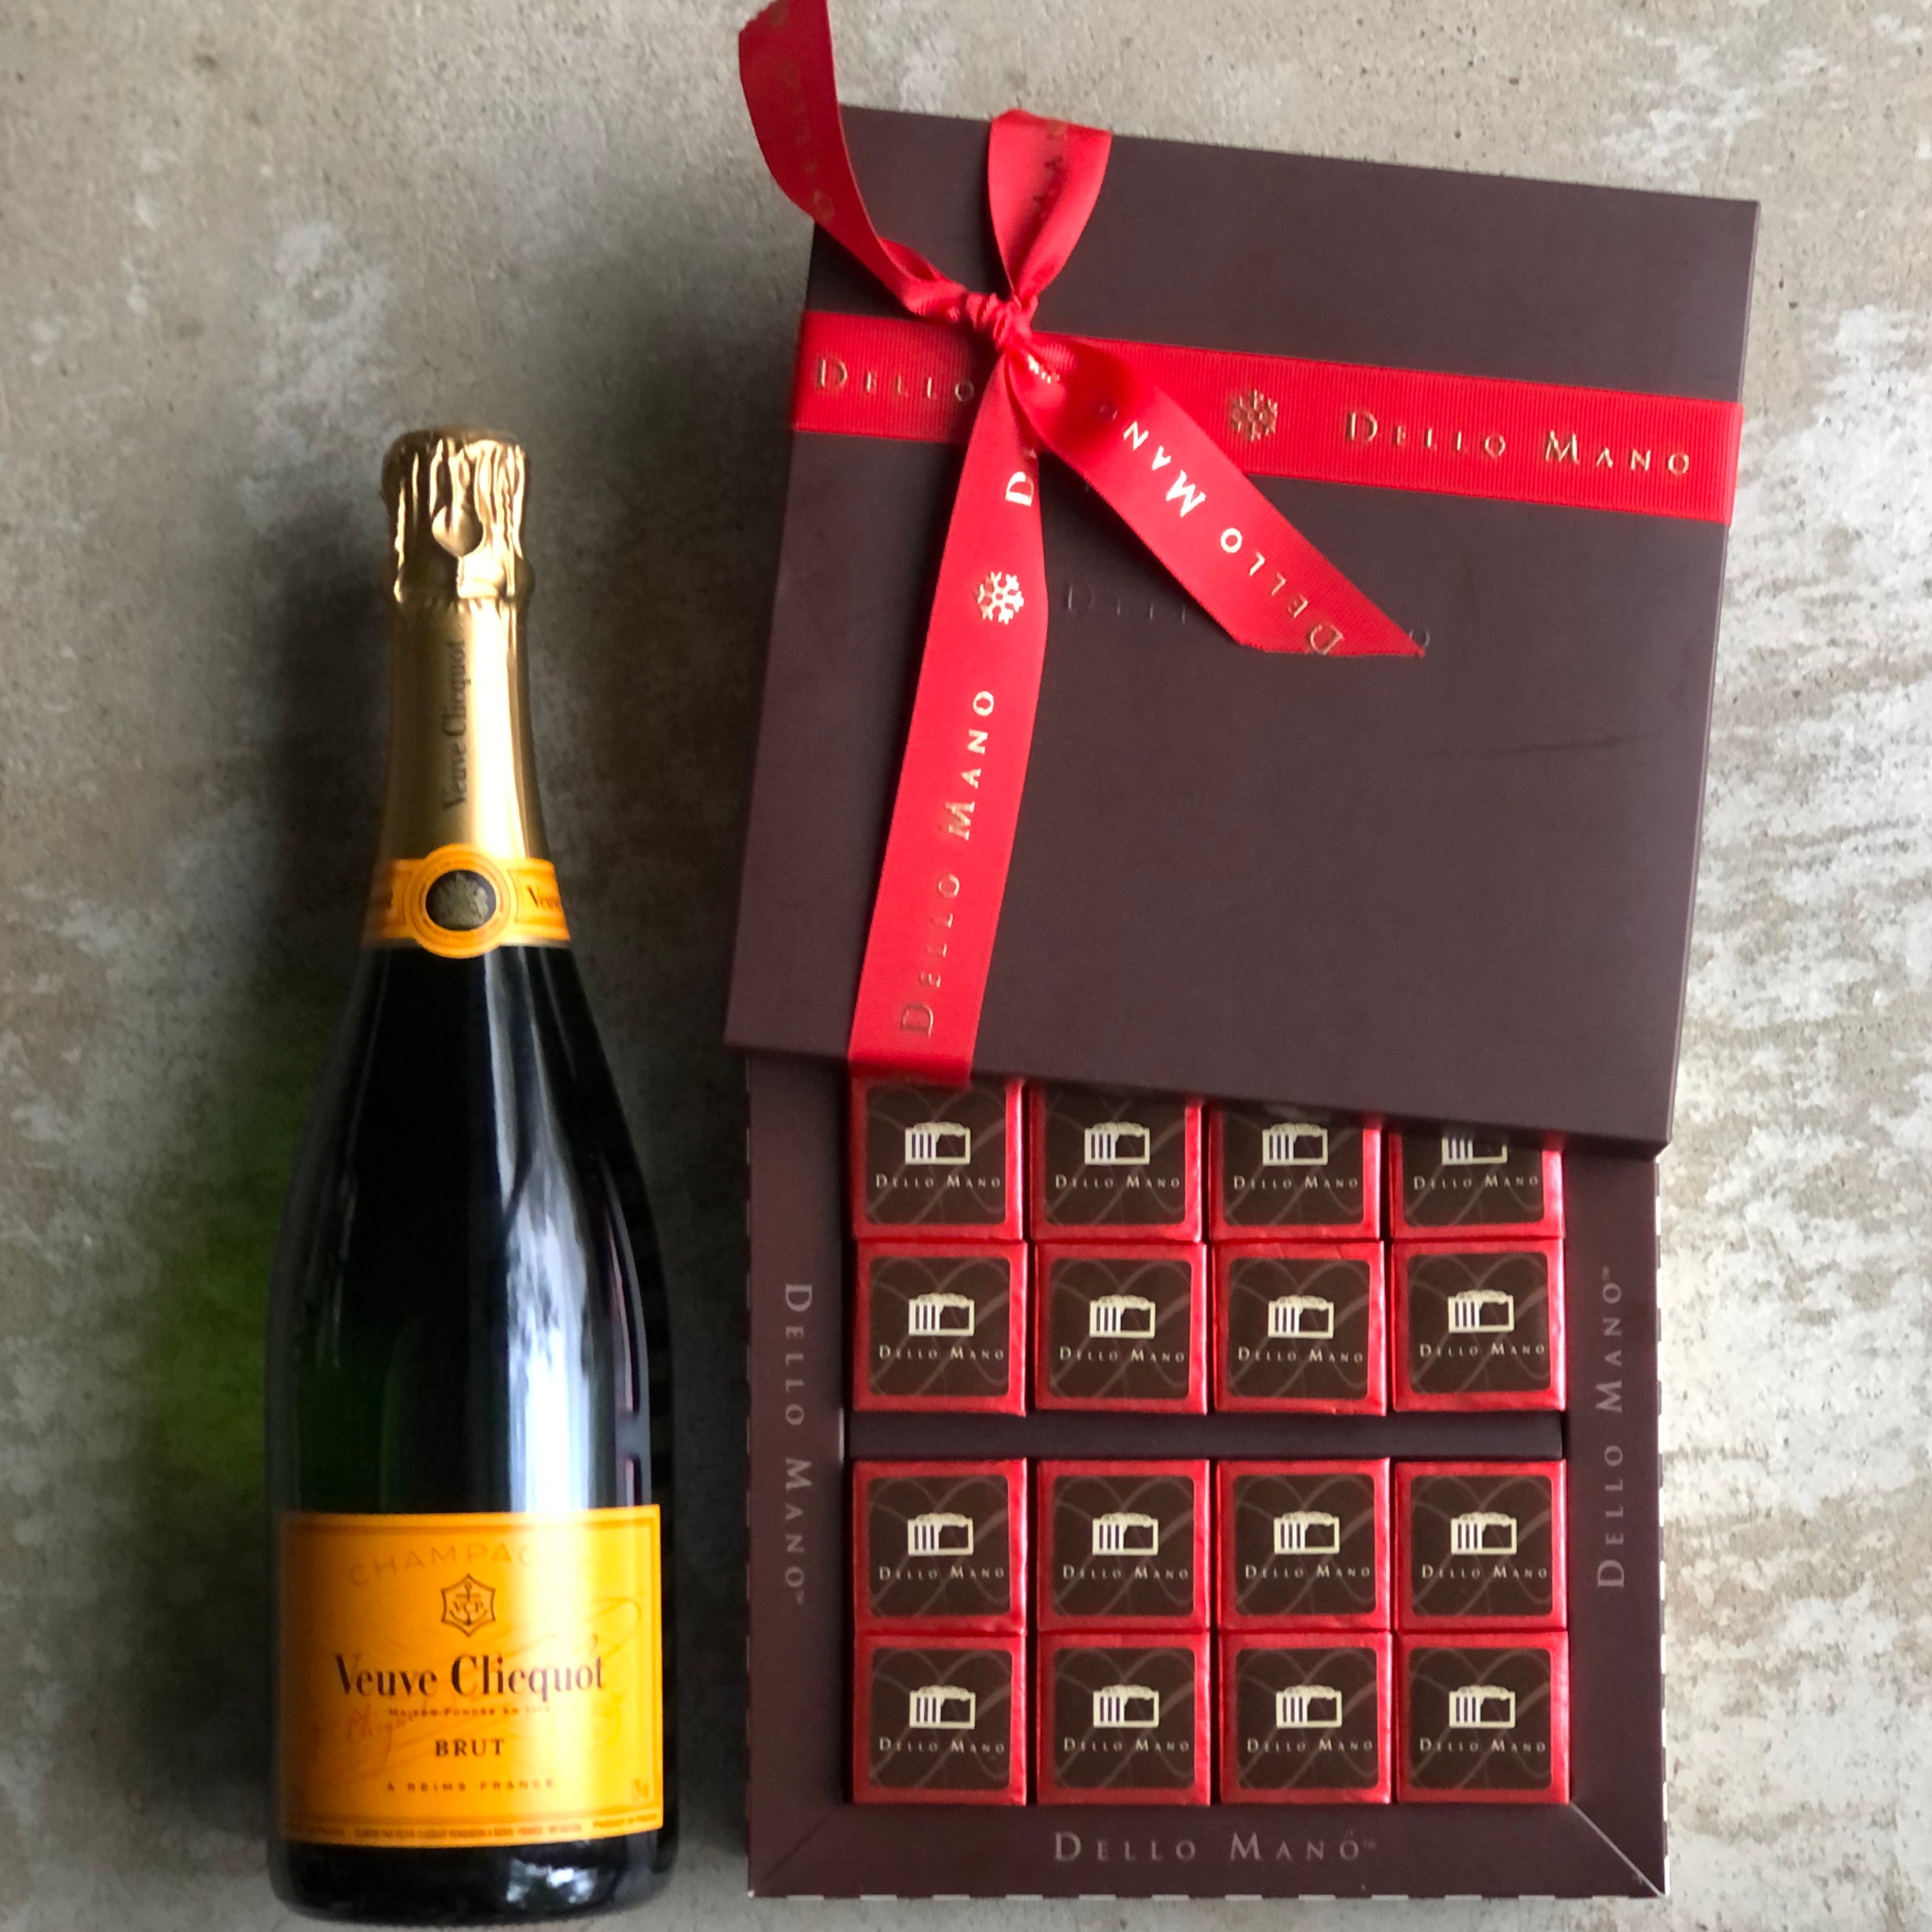 An open box of red foiled individually wrapped gluten free brownies in  a brown chocolate gift box. Beside the box is a bottle of Veuve cCiquot champagne.